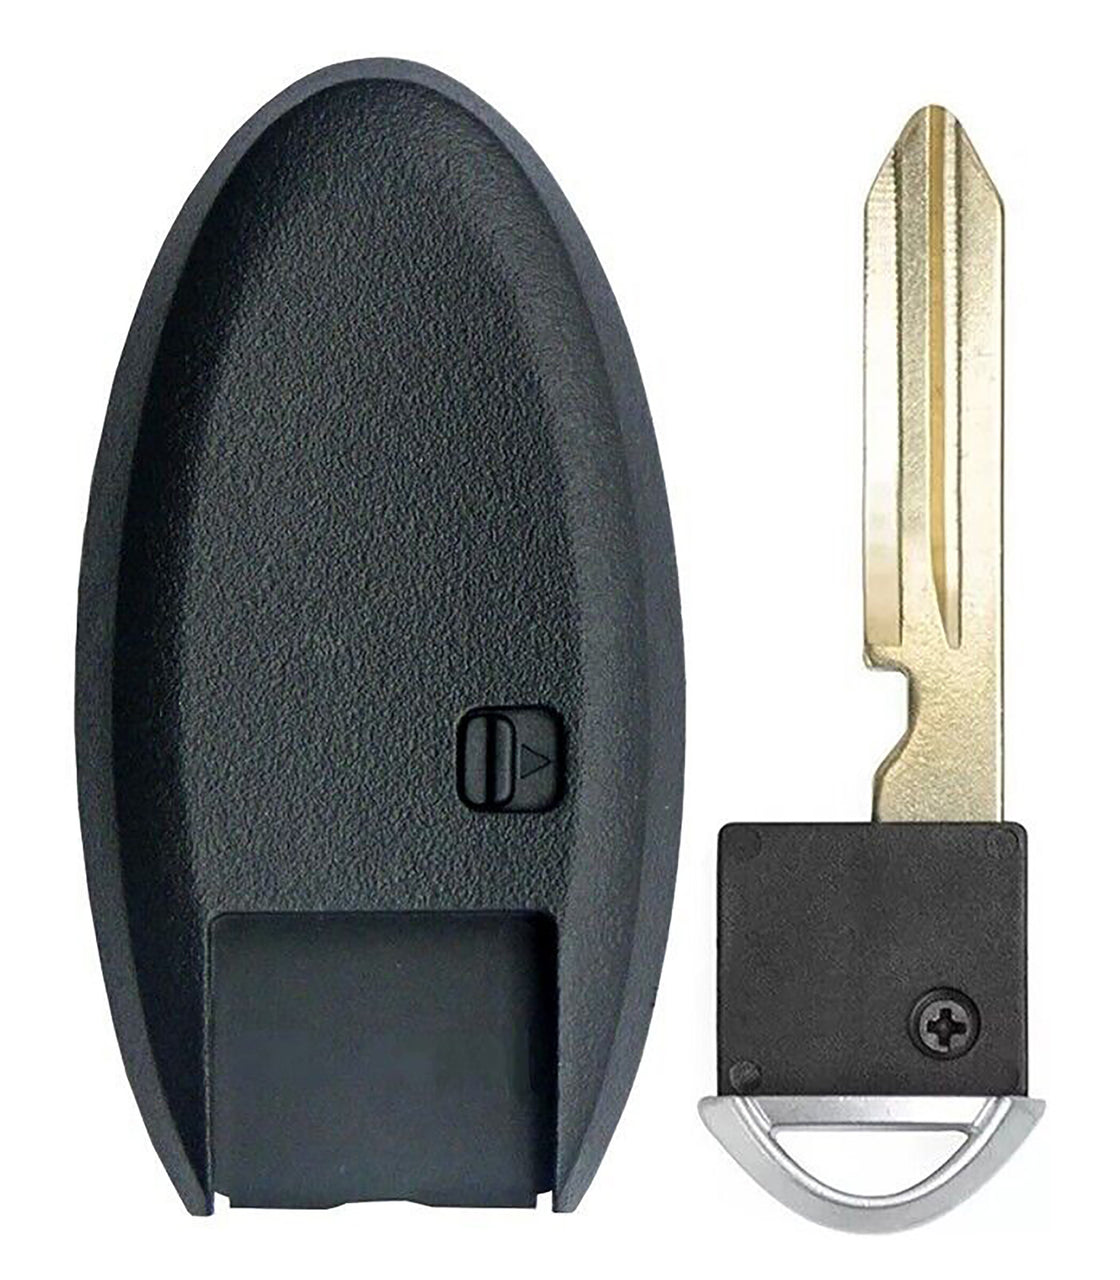 1x New Replacement Proximity Key Fob SHELL / CASE Compatible with & Fit For Nissan Vehicles - MPN KR5S180144014-SH-04 (NO electronics or Chip inside)